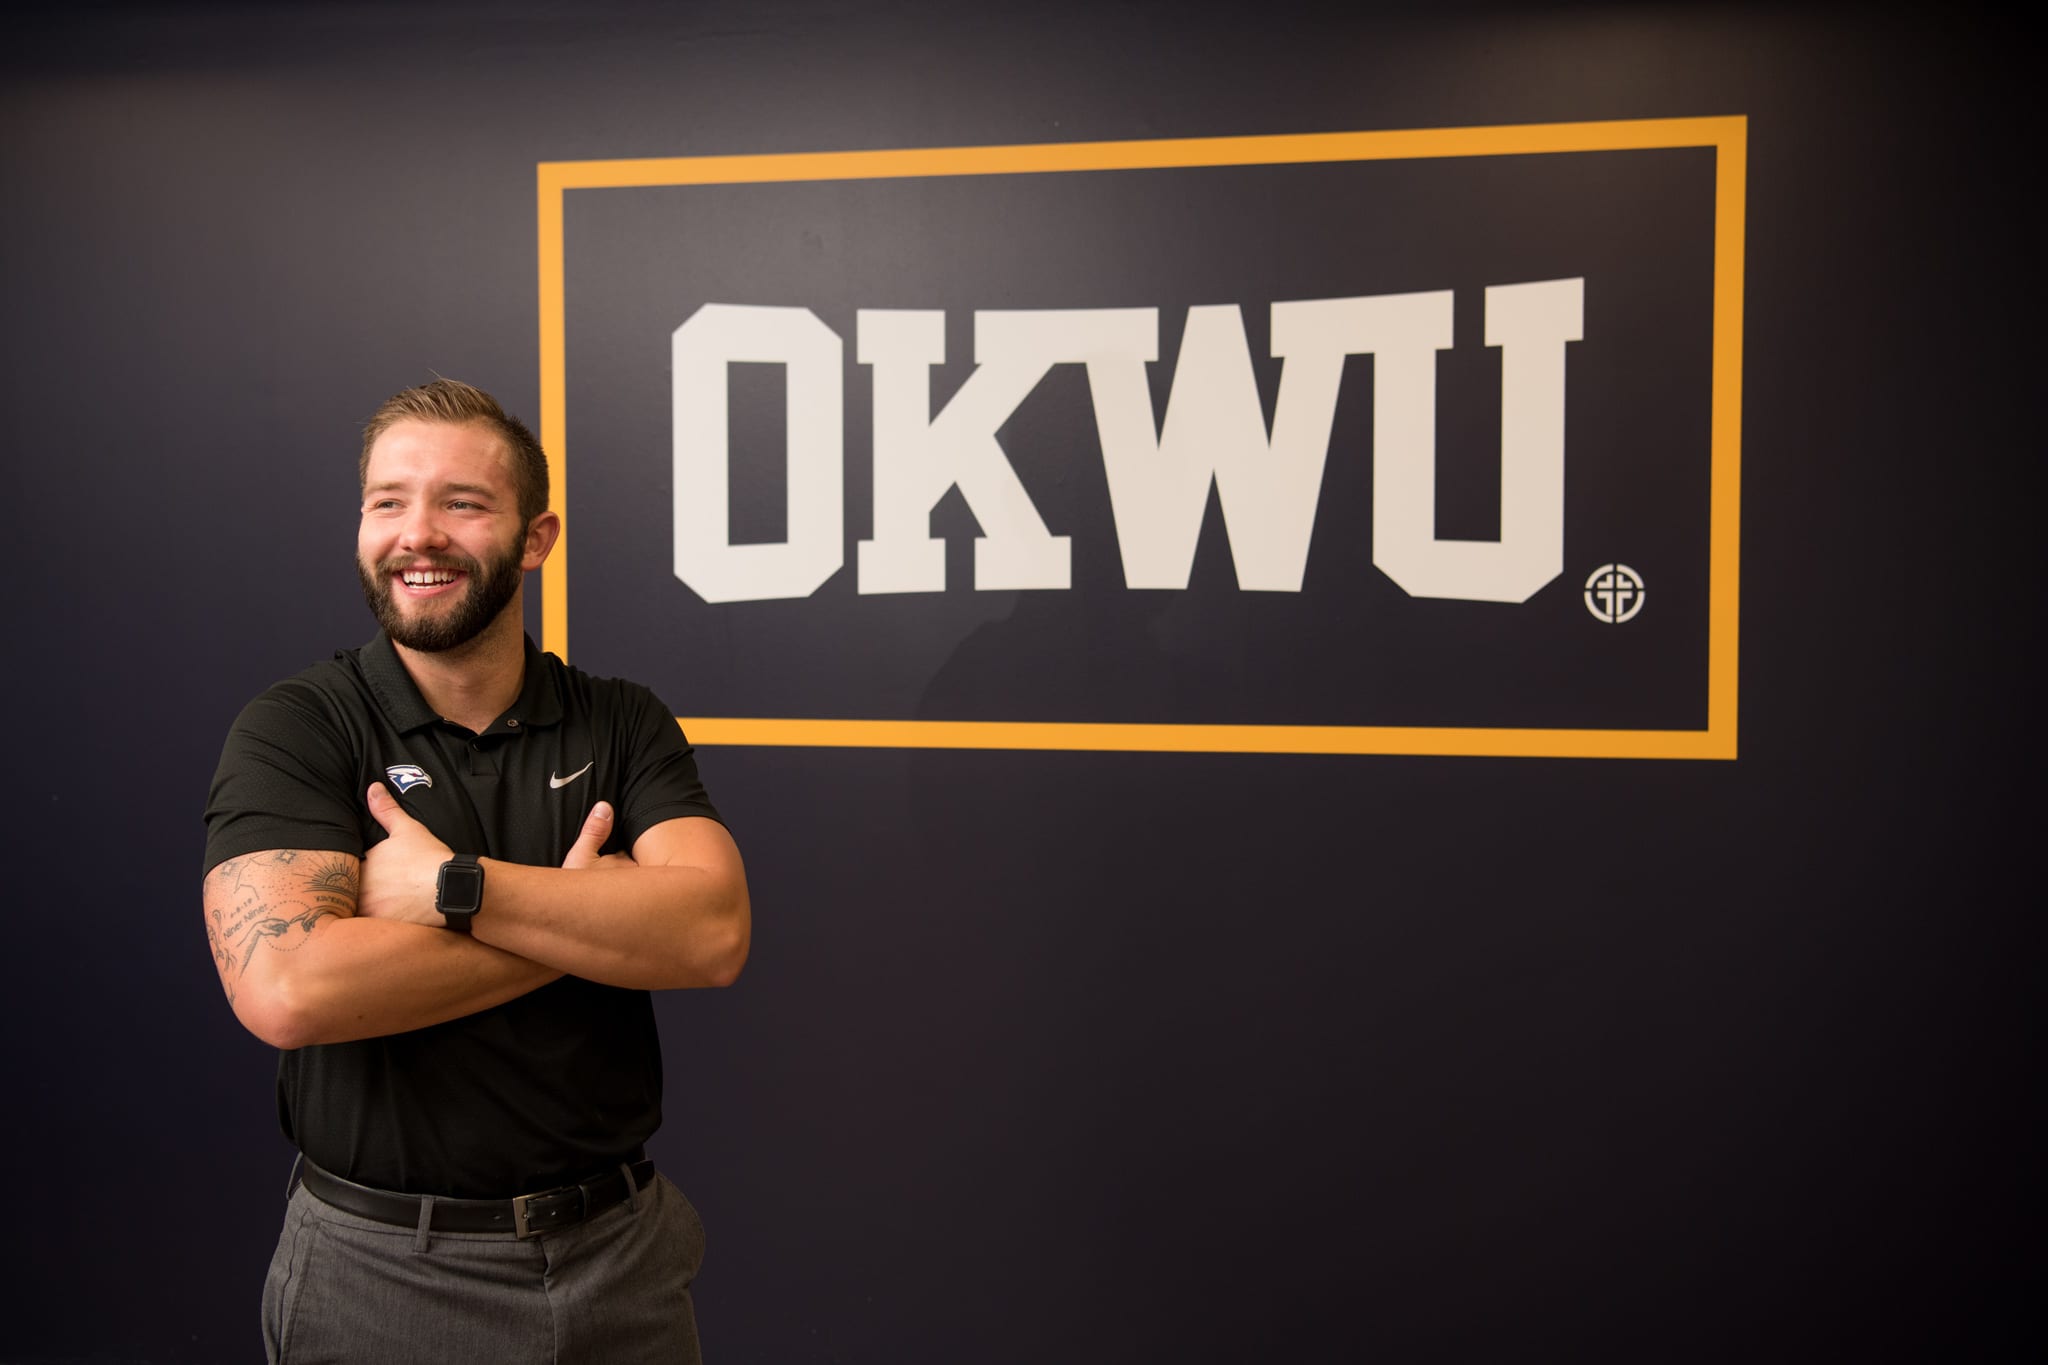 Jake Feickert standing next to the large OKWU mural